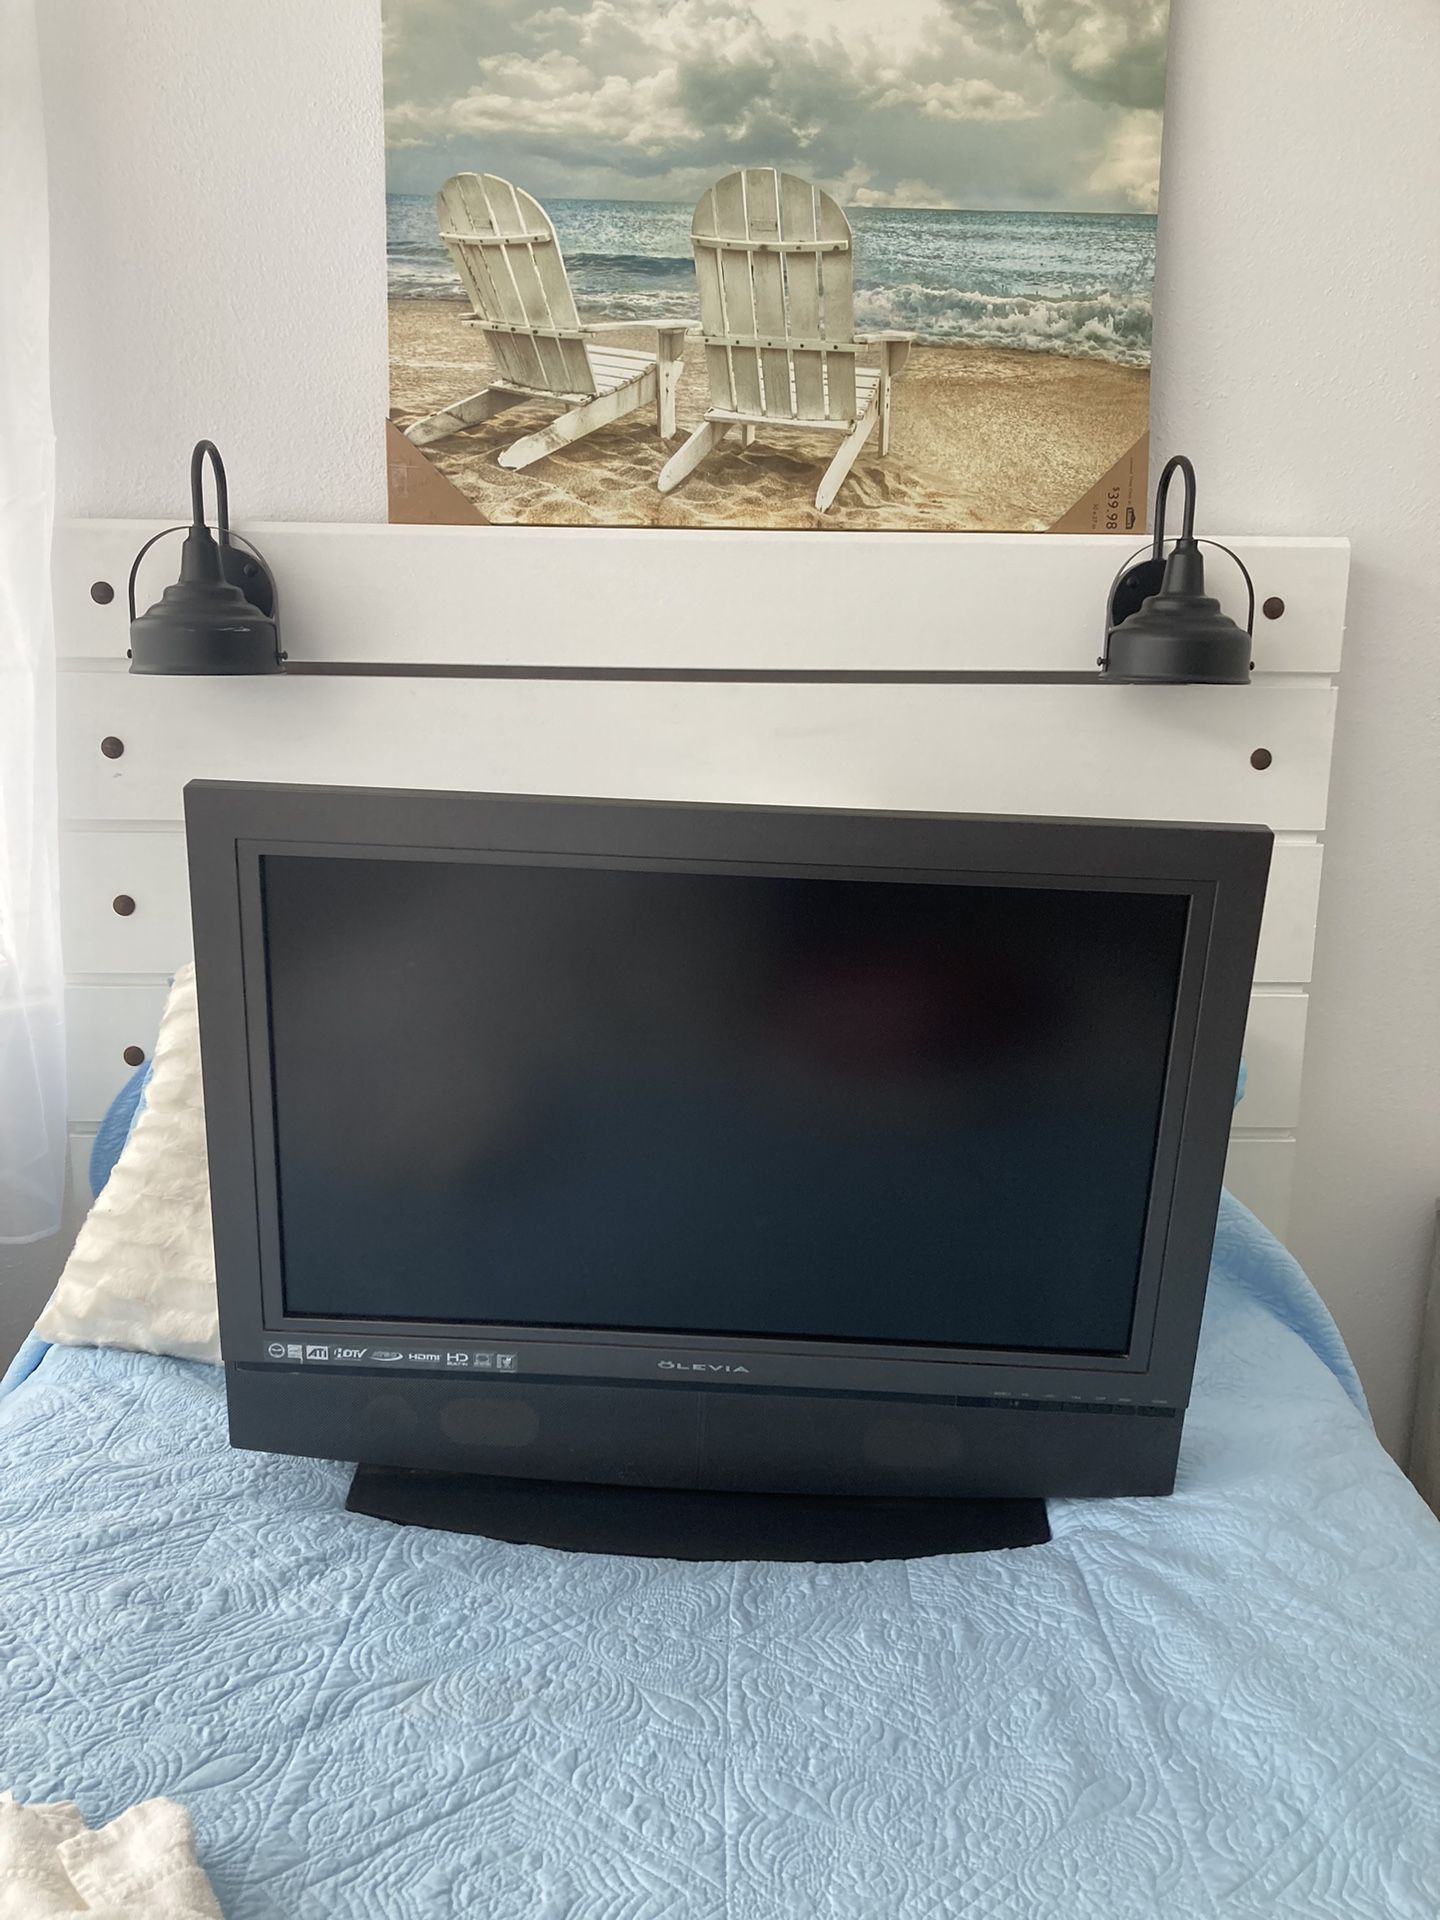 Tv 32 Inch Olivia Works Great - Not Smart Tv 